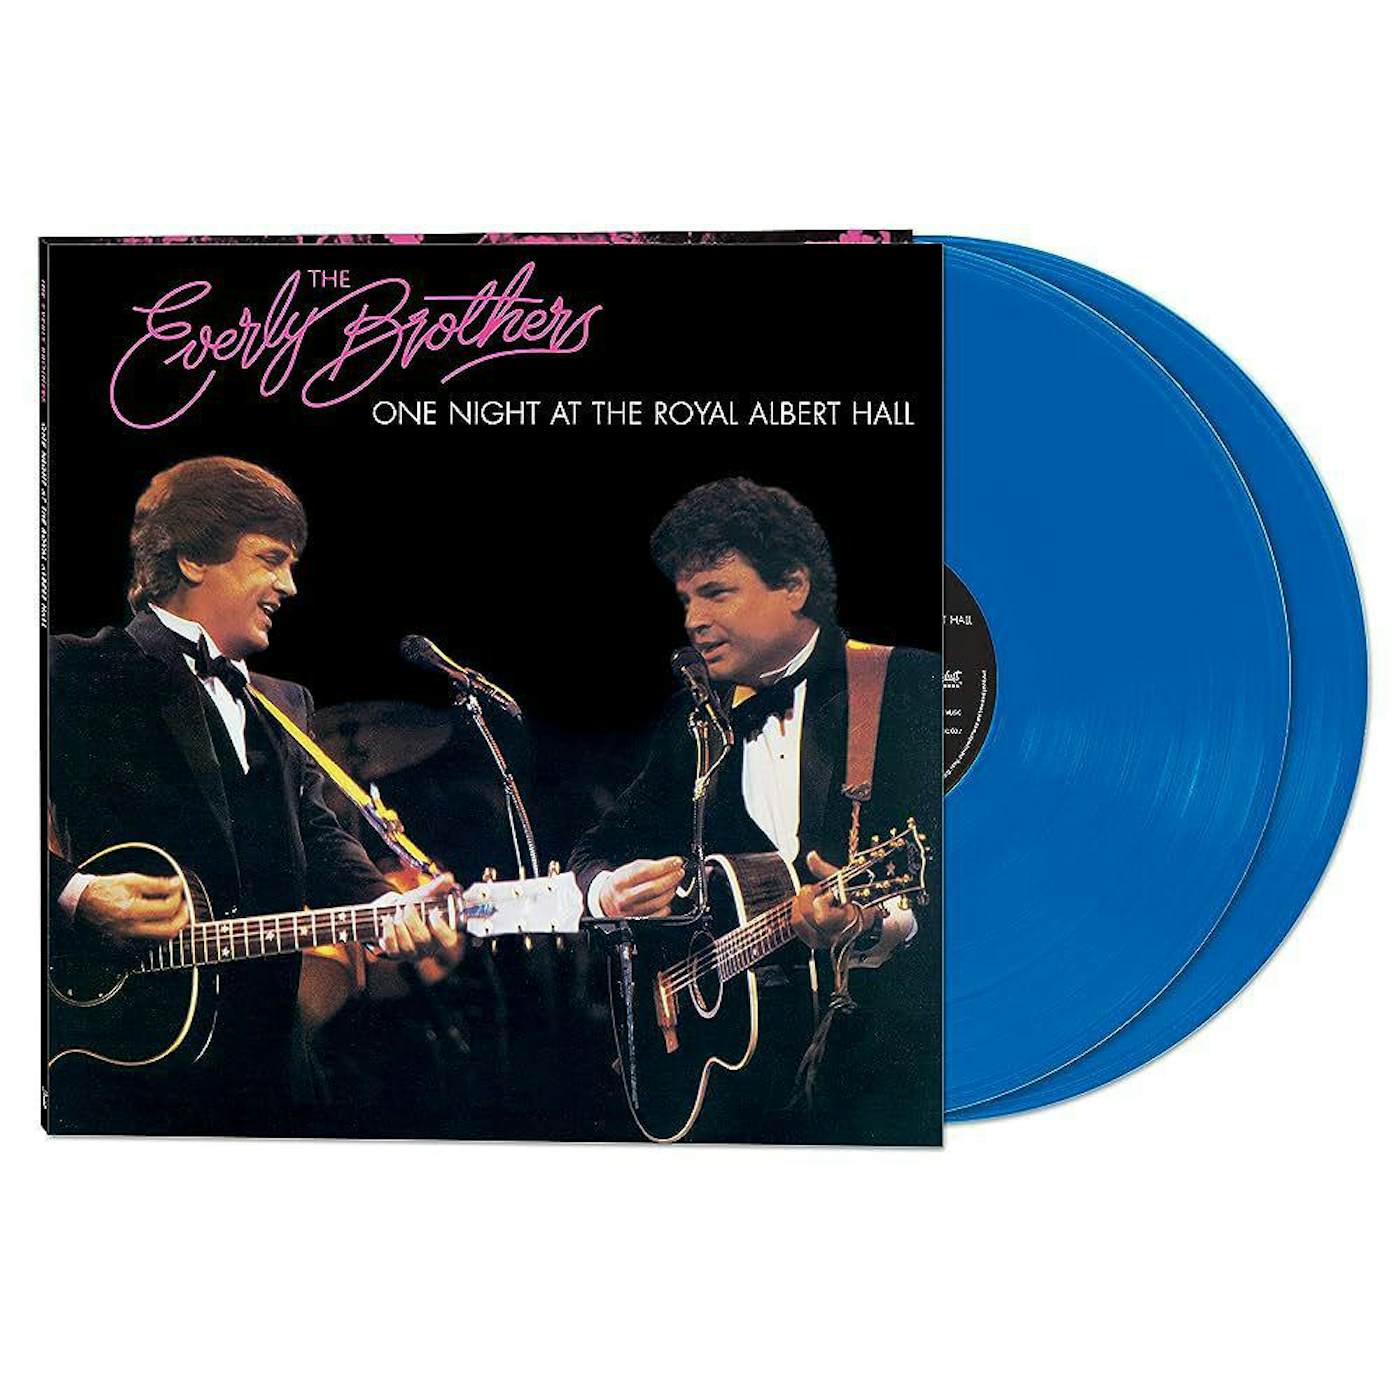 The Everly Brothers One Night At The Royal Albert Hall - Blue (2LP) Vinyl Record